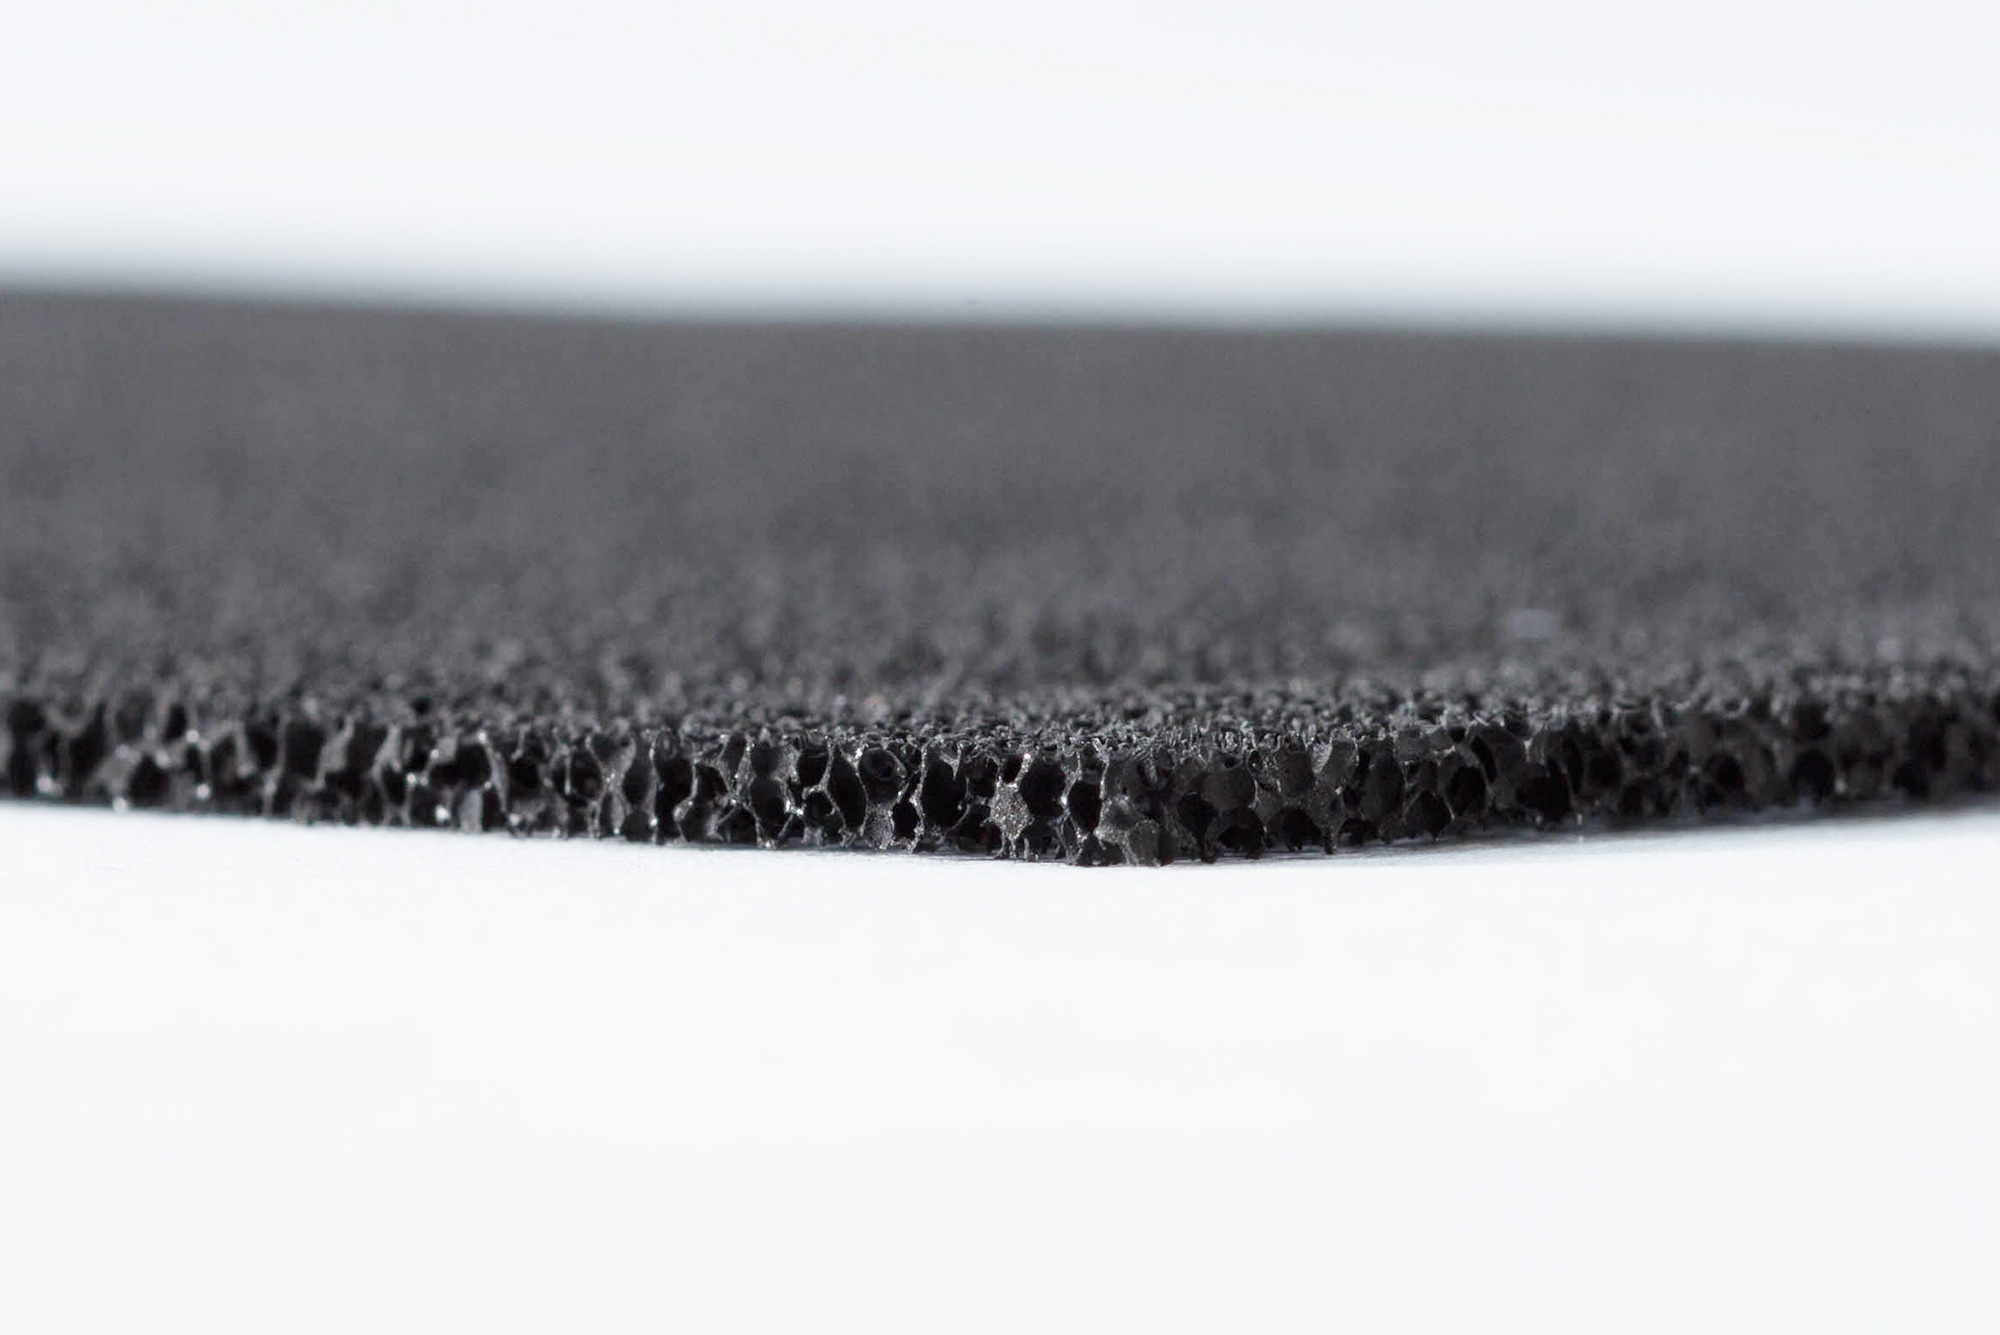 New air filter media for air filtering. Activated carbon foam/Sponge